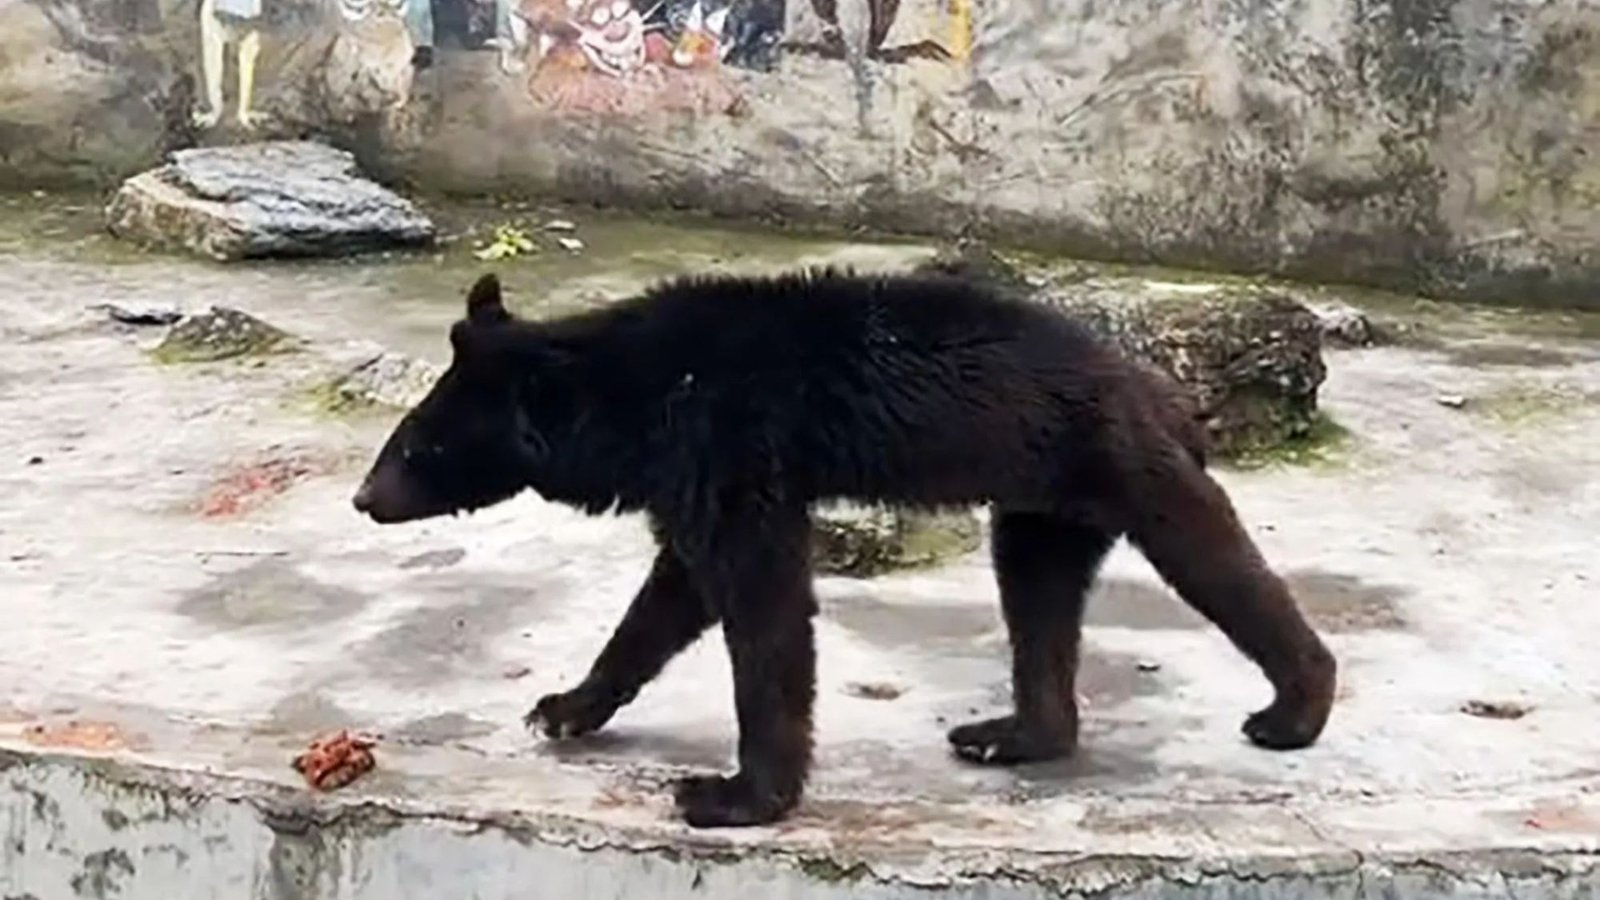 Tragic vid shows ‘world’s saddest bear’ look emaciated after ‘living on bread & veg at skint zoo that can’t afford meat’